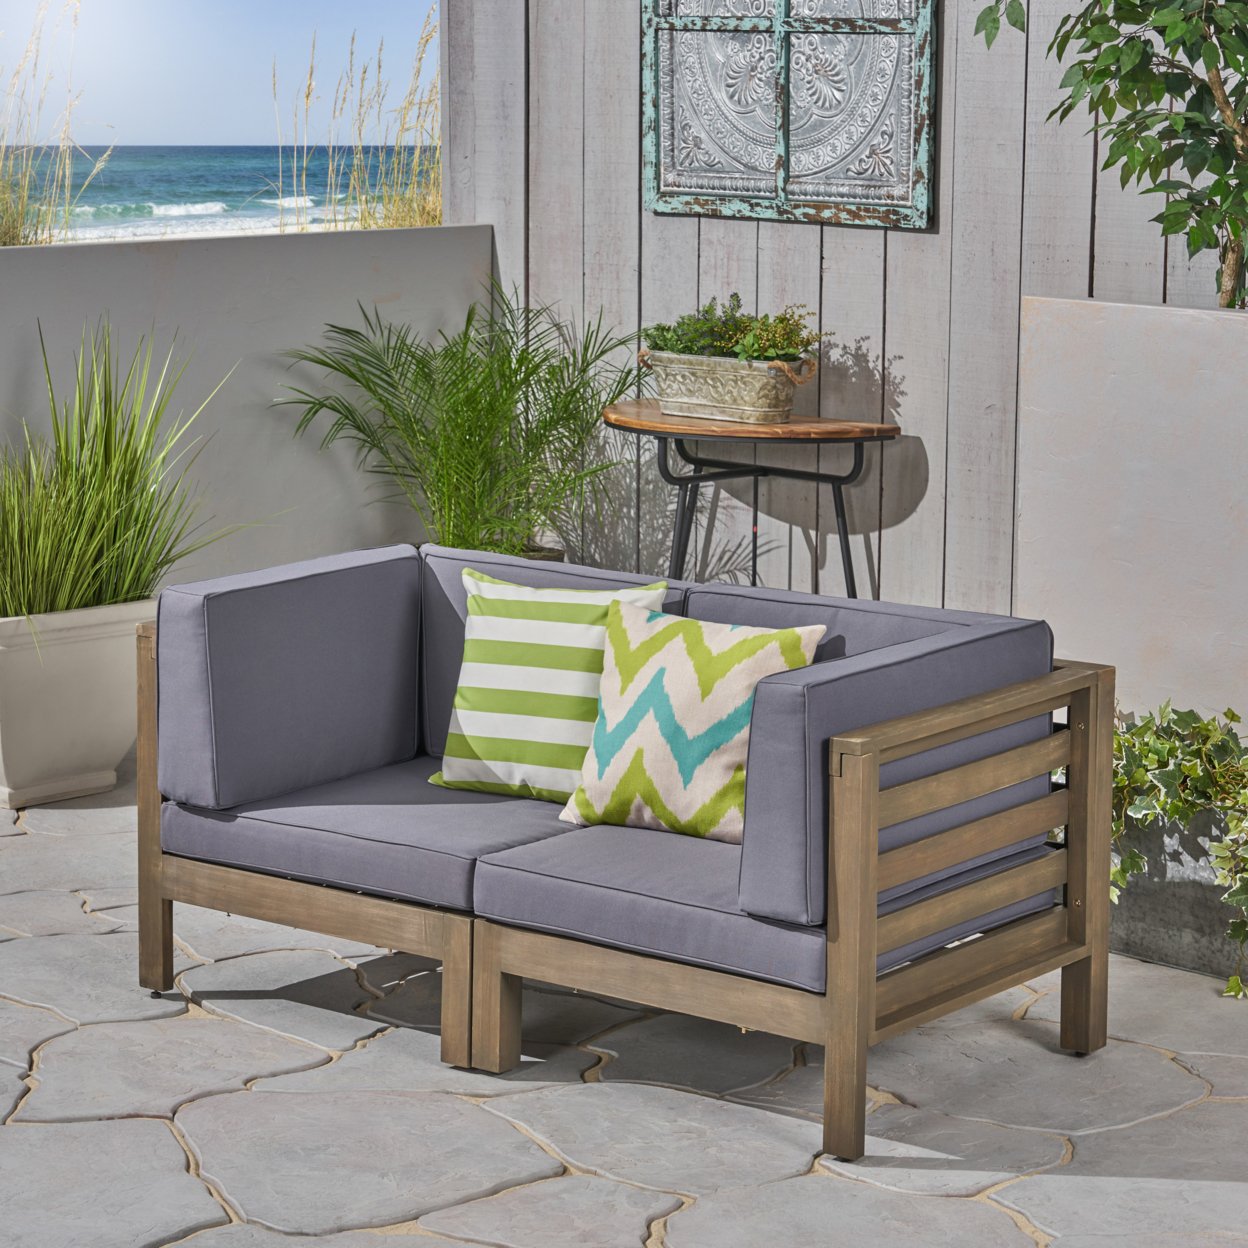 Great Deal Furniture Dawson Outdoor Sectional Loveseat Set - 2-Seater - Acacia Wood - Outdoor Cushions - Dark Gray